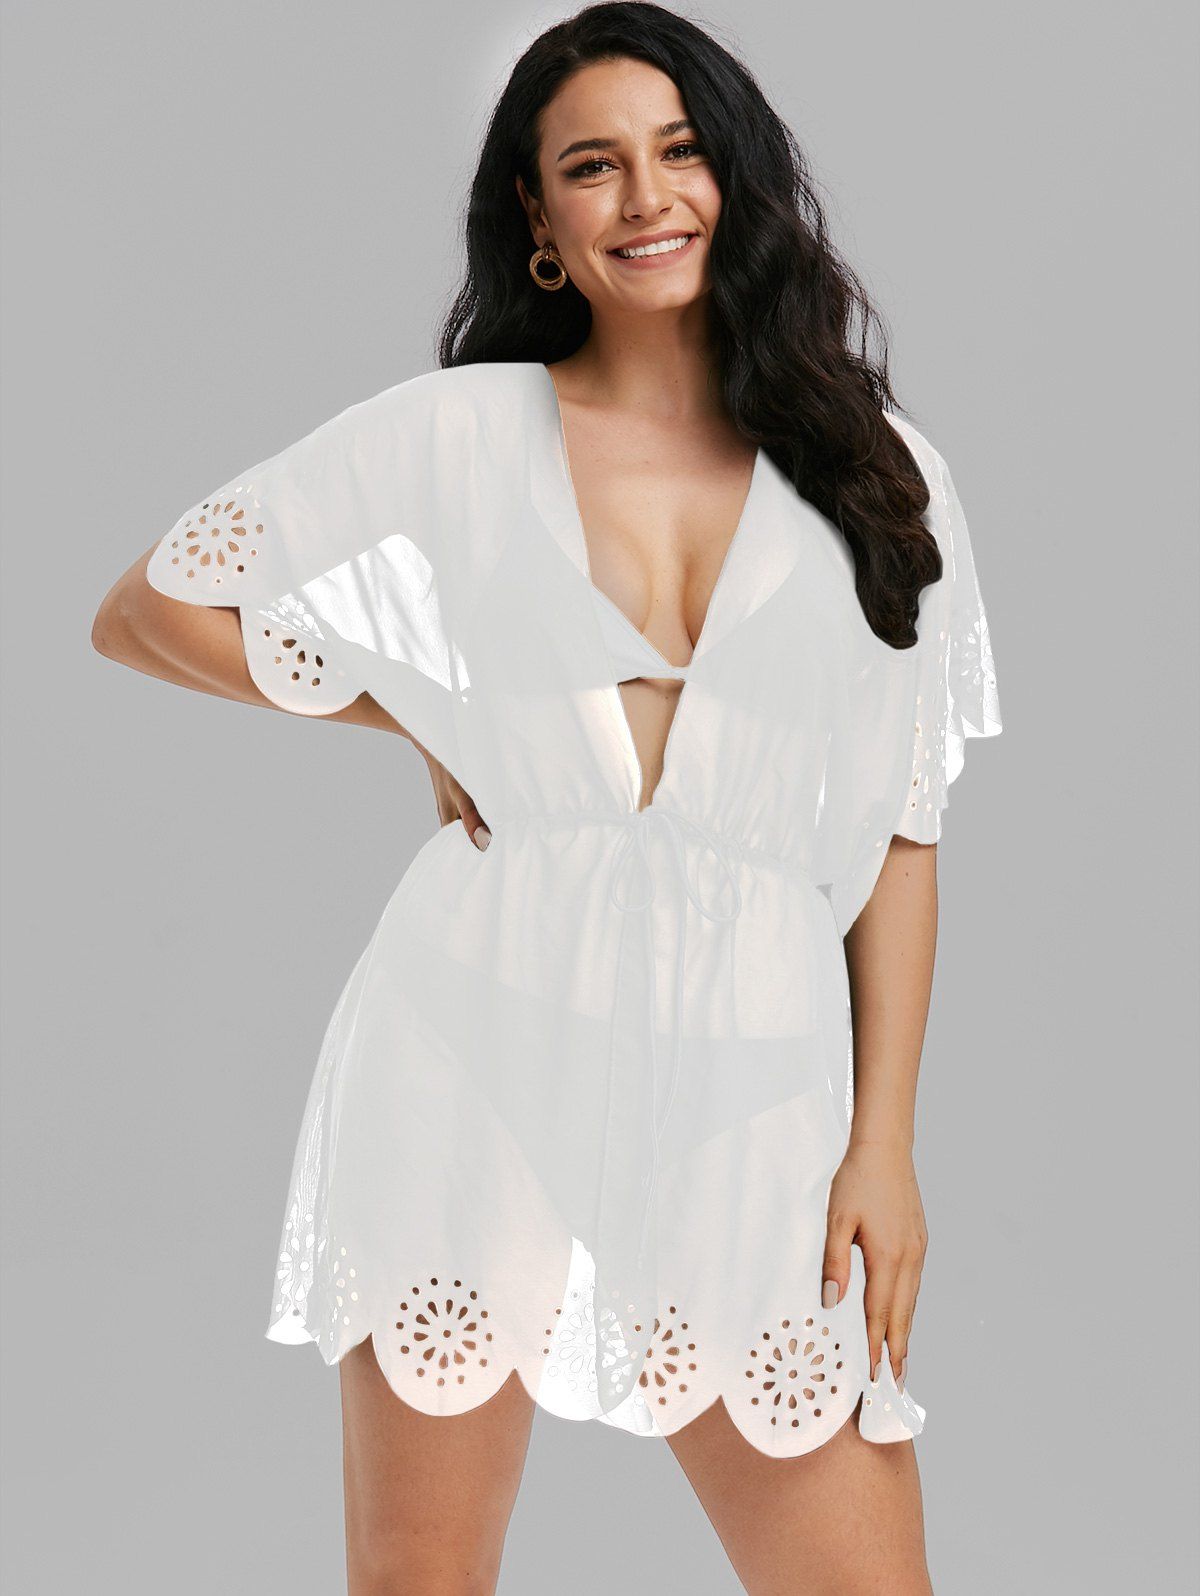 Sheer Cover Up Laser Cut Out Scalloped Plunging Neck Bat Sleeve Tunic Beach Top - WHITE M